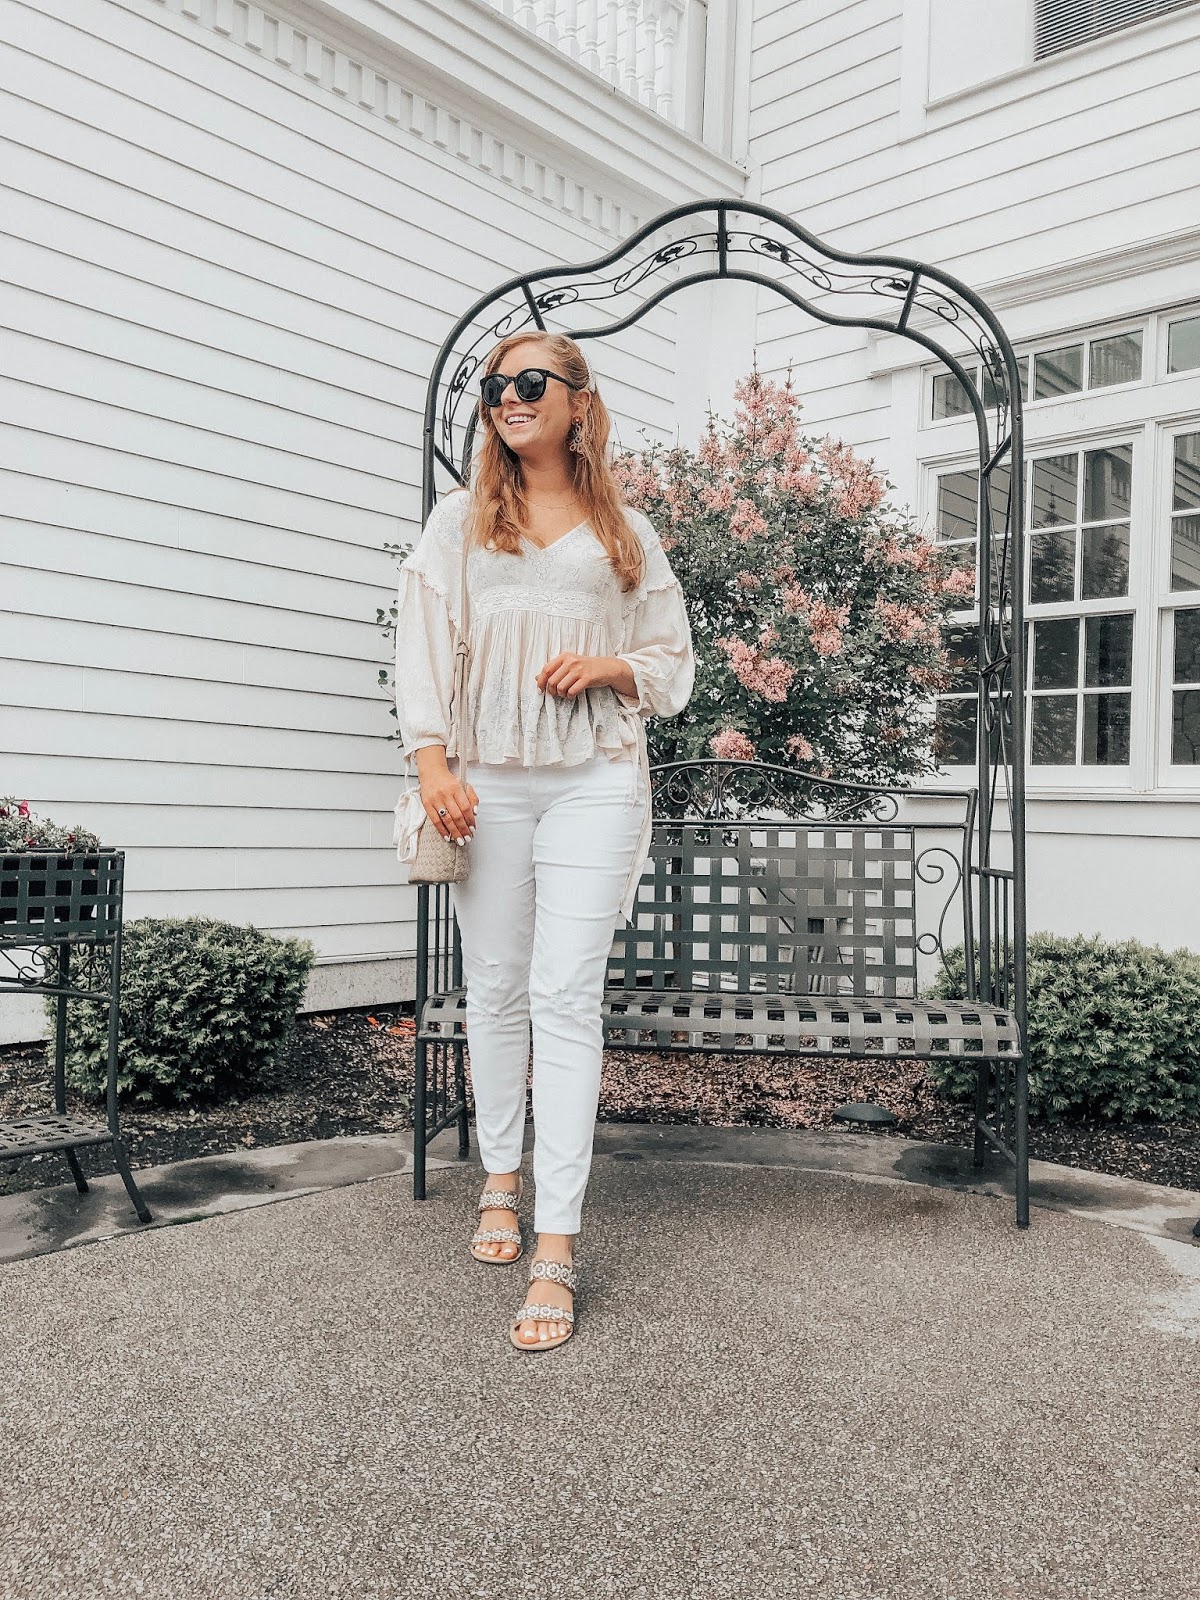 Affordable by Amanda | Easy Ways to Style White Jeans for Summer